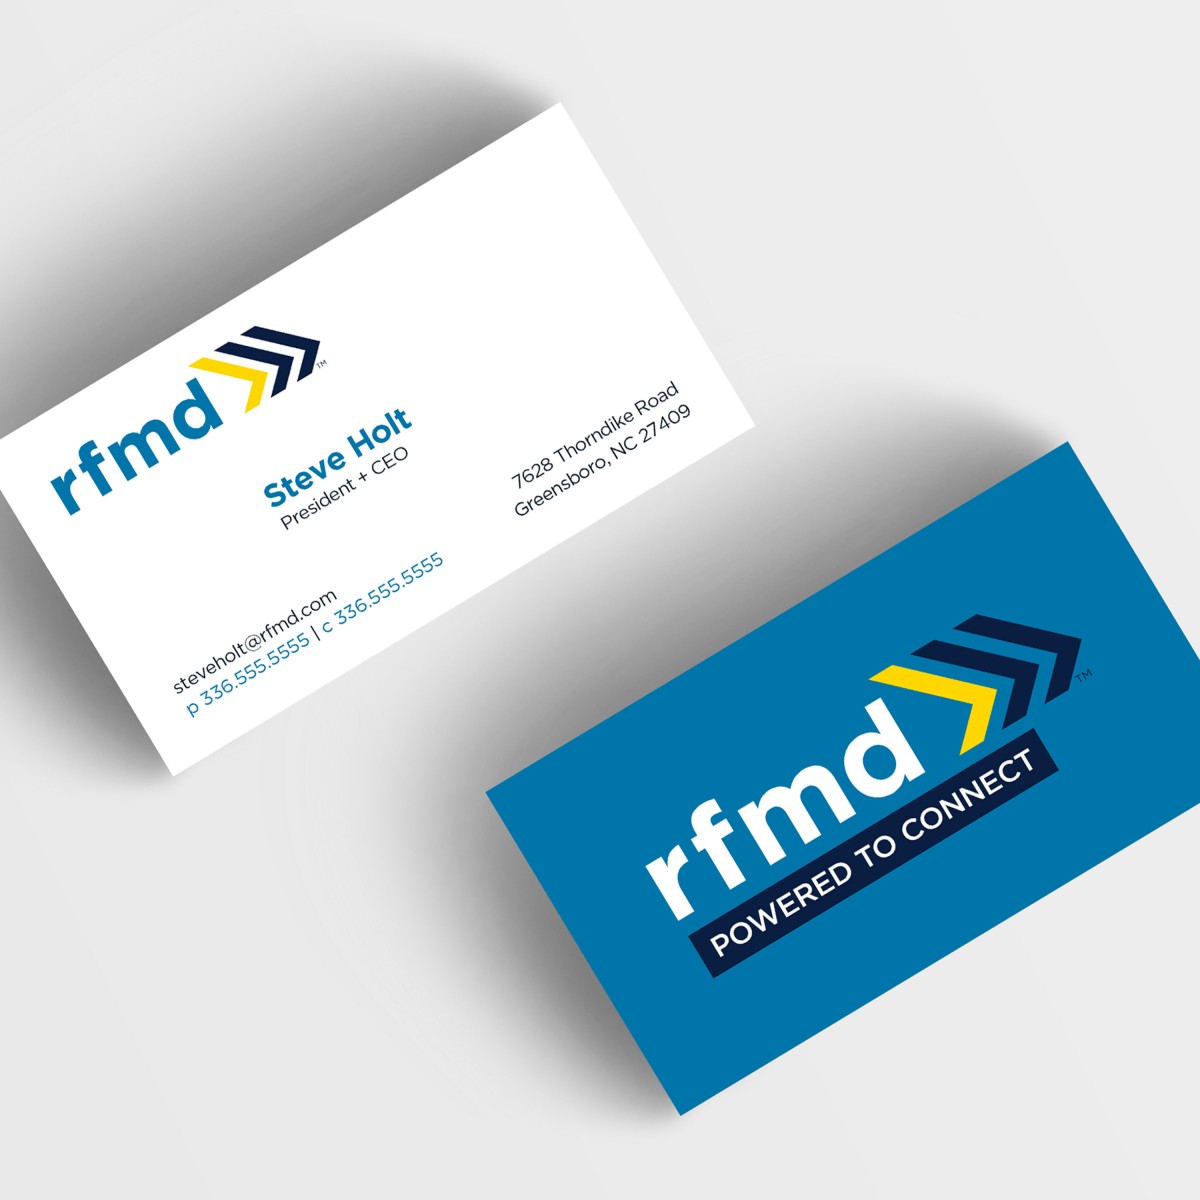 RFMD business cards